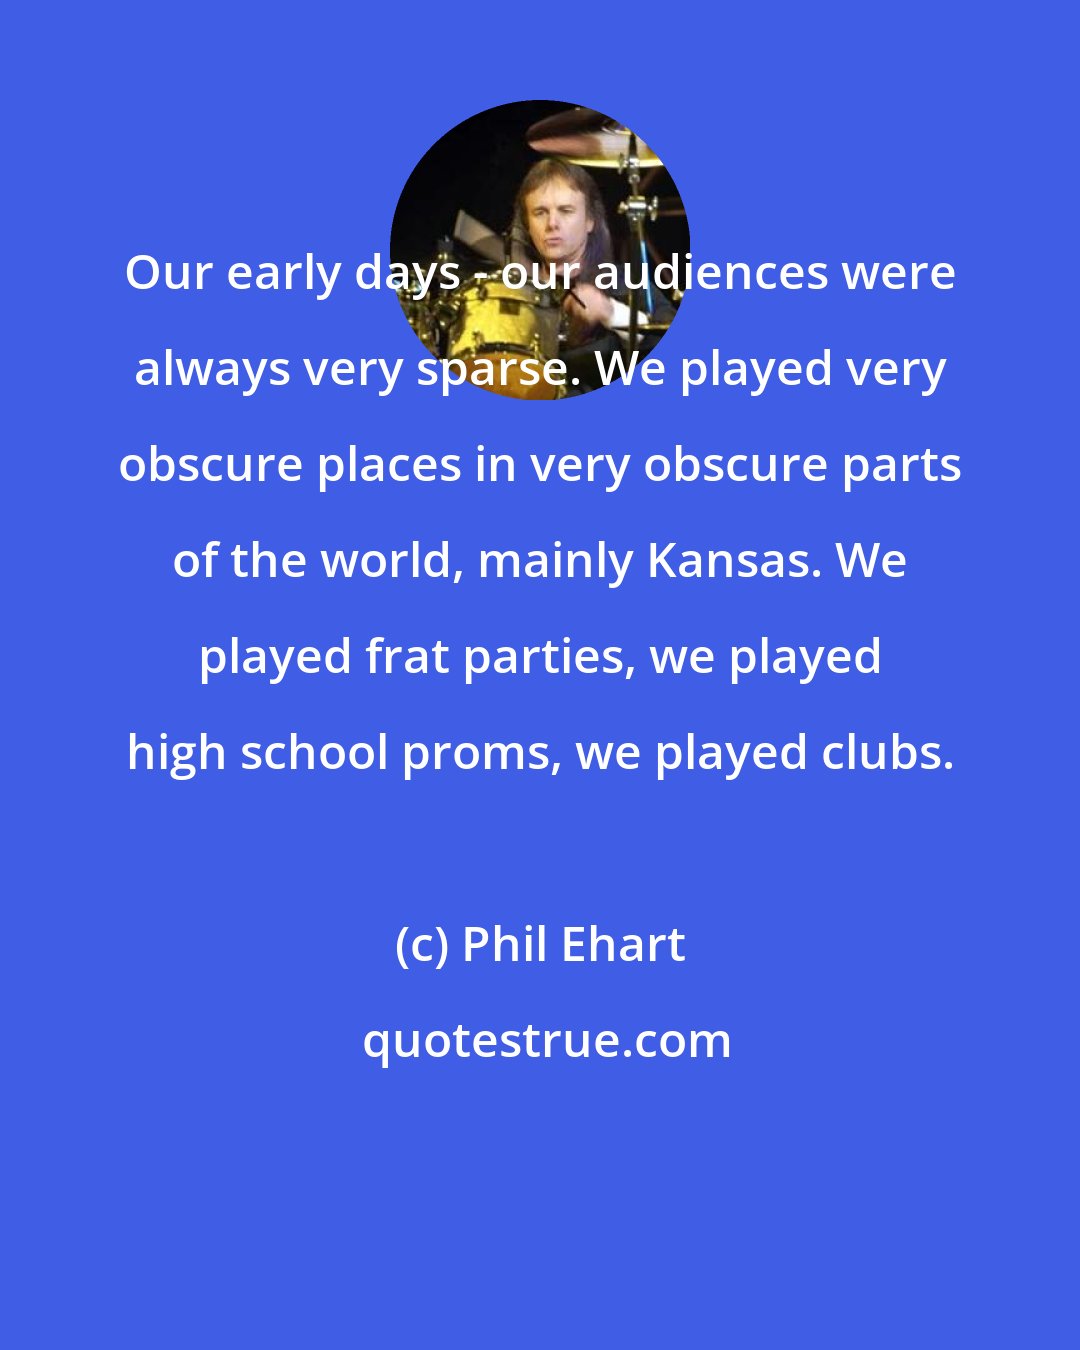 Phil Ehart: Our early days - our audiences were always very sparse. We played very obscure places in very obscure parts of the world, mainly Kansas. We played frat parties, we played high school proms, we played clubs.